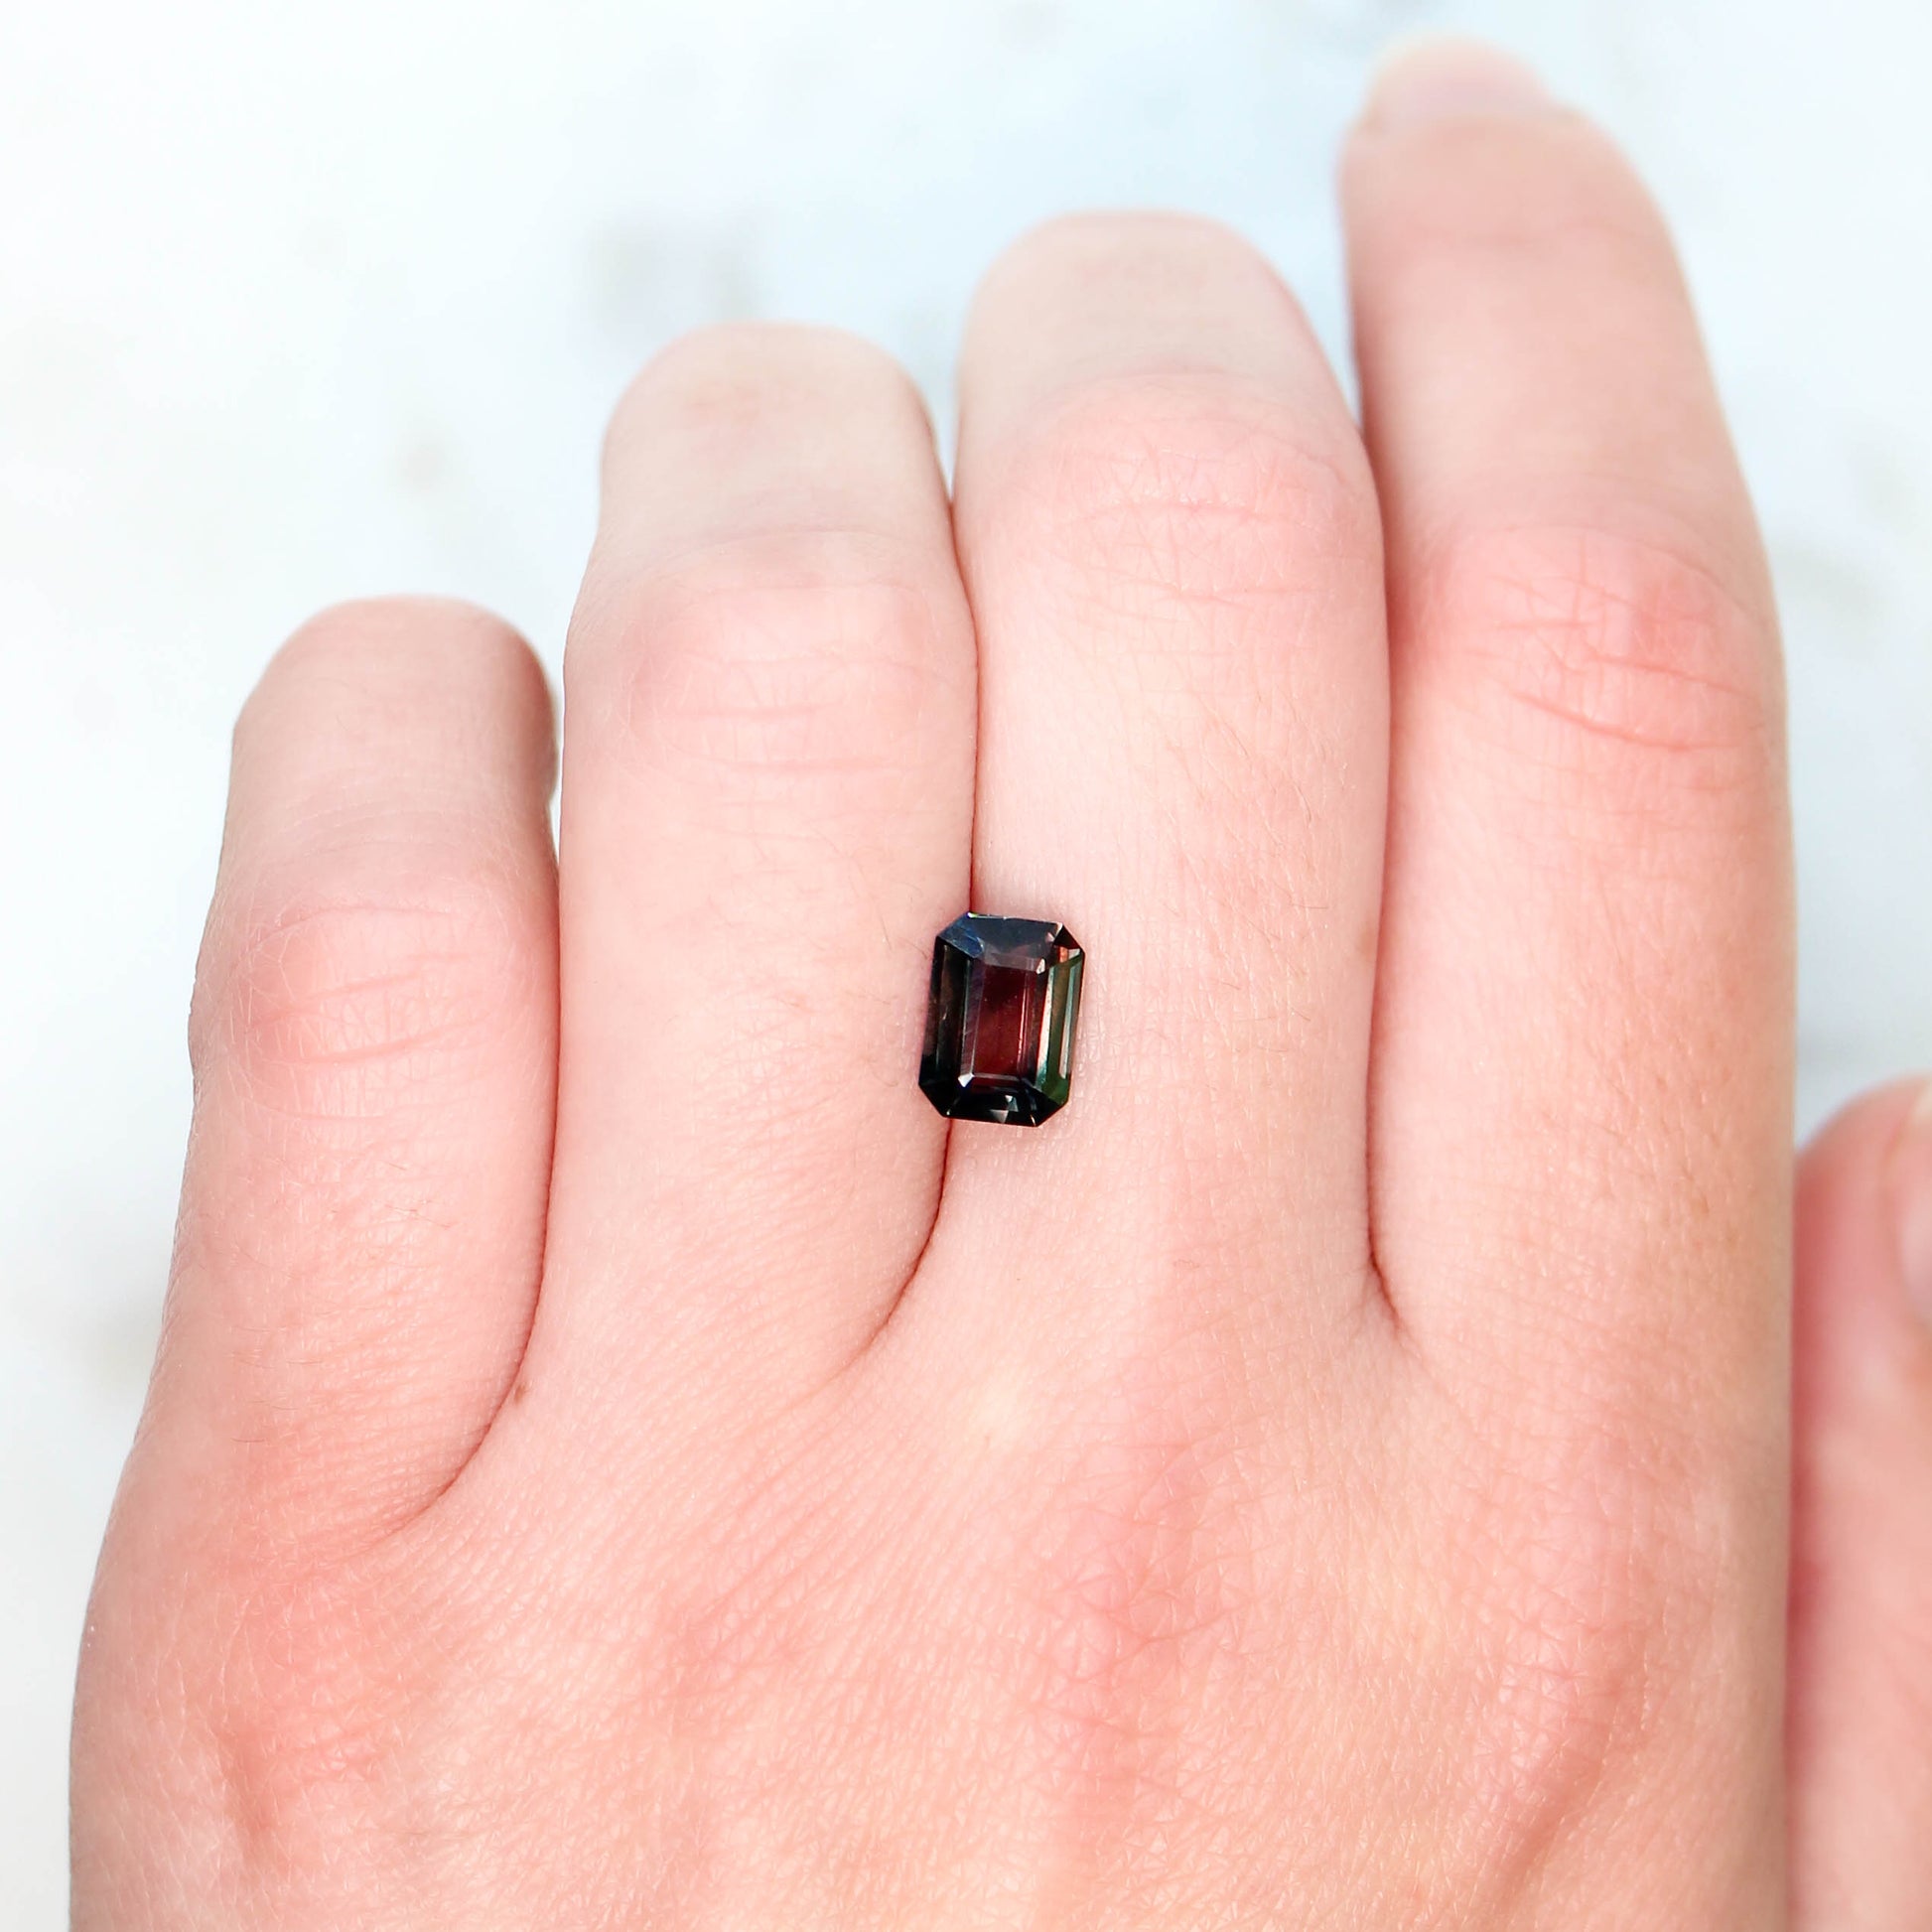 2.12 Carat Brown & Green Emerald Cut Sapphire for Custom Work - Inventory Code BES212 - Midwinter Co. Alternative Bridal Rings and Modern Fine Jewelry